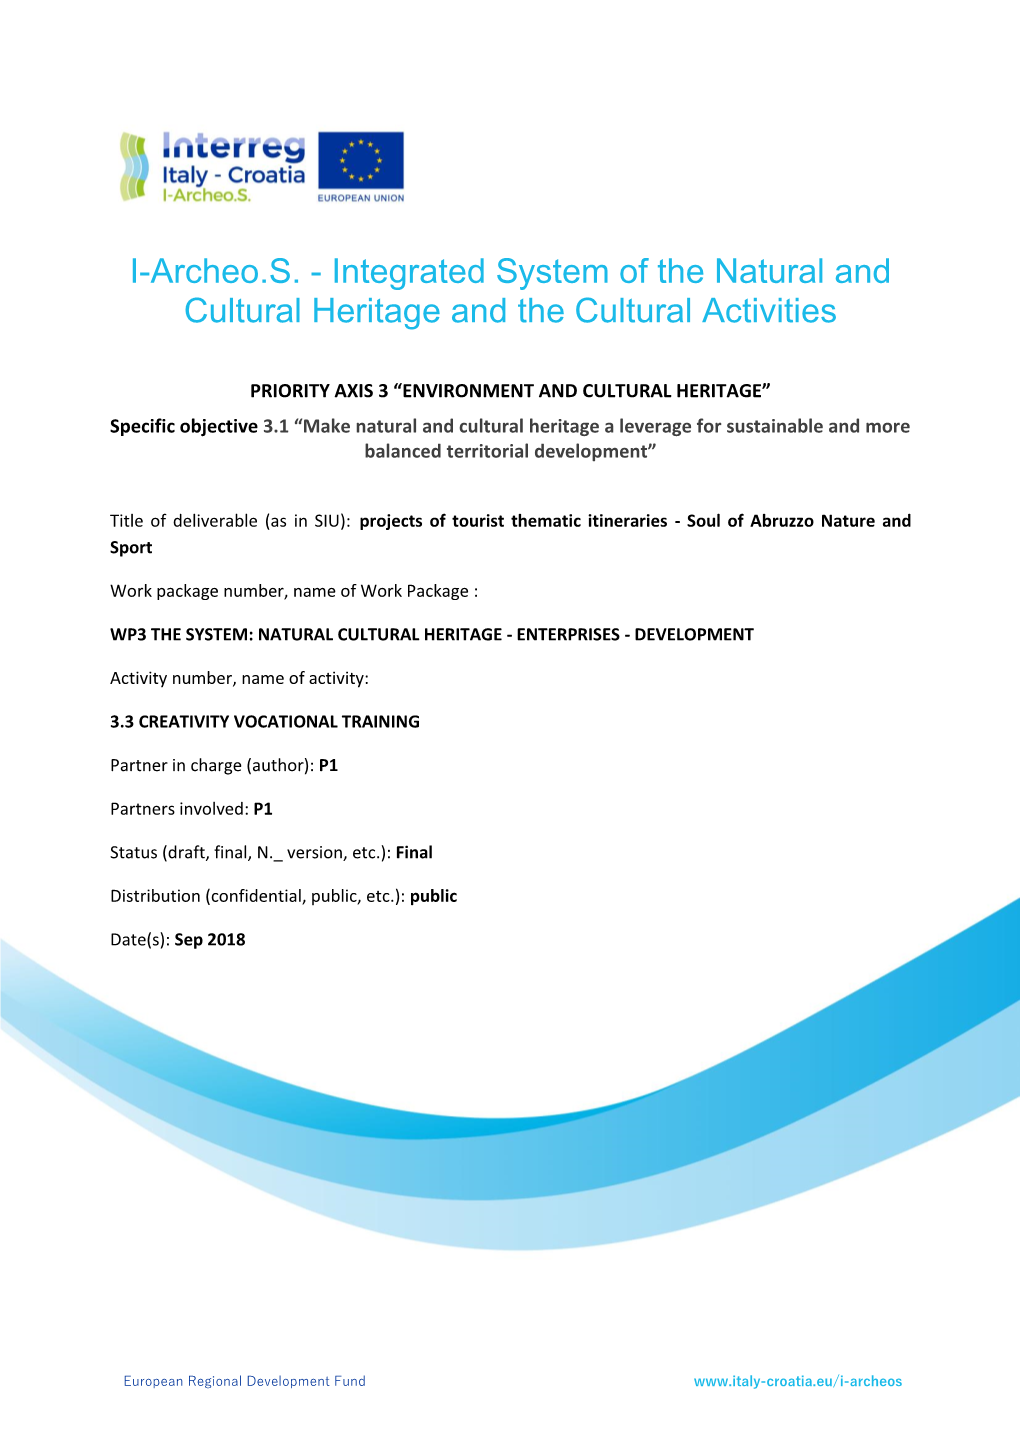 I-Archeo.S. - Integrated System of the Natural and Cultural Heritage and the Cultural Activities